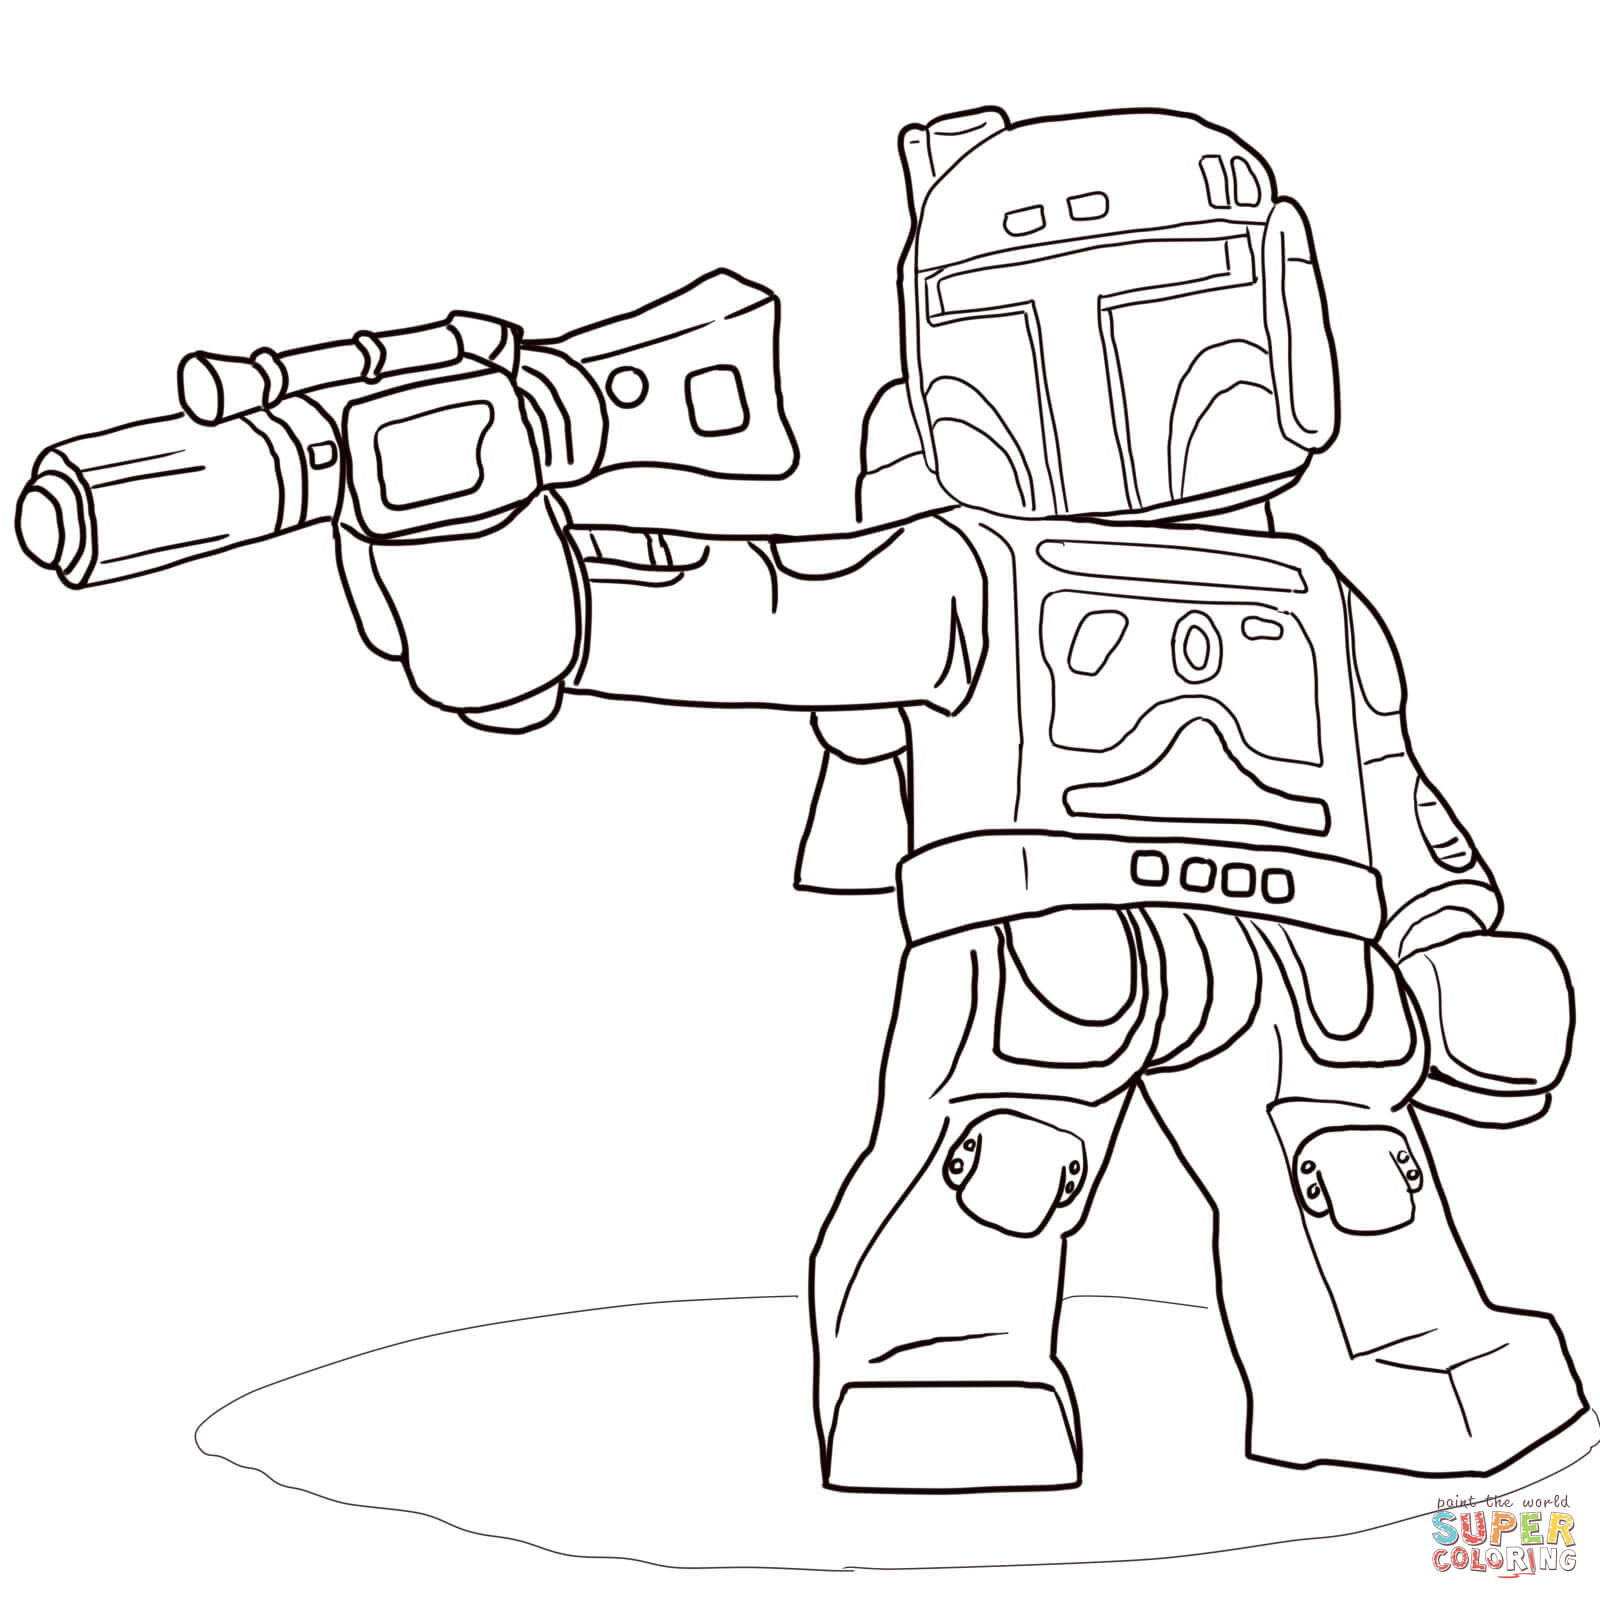 Lego Star Wars Printable Coloring Pages
 Lego Star Wars Boba Fett coloring page